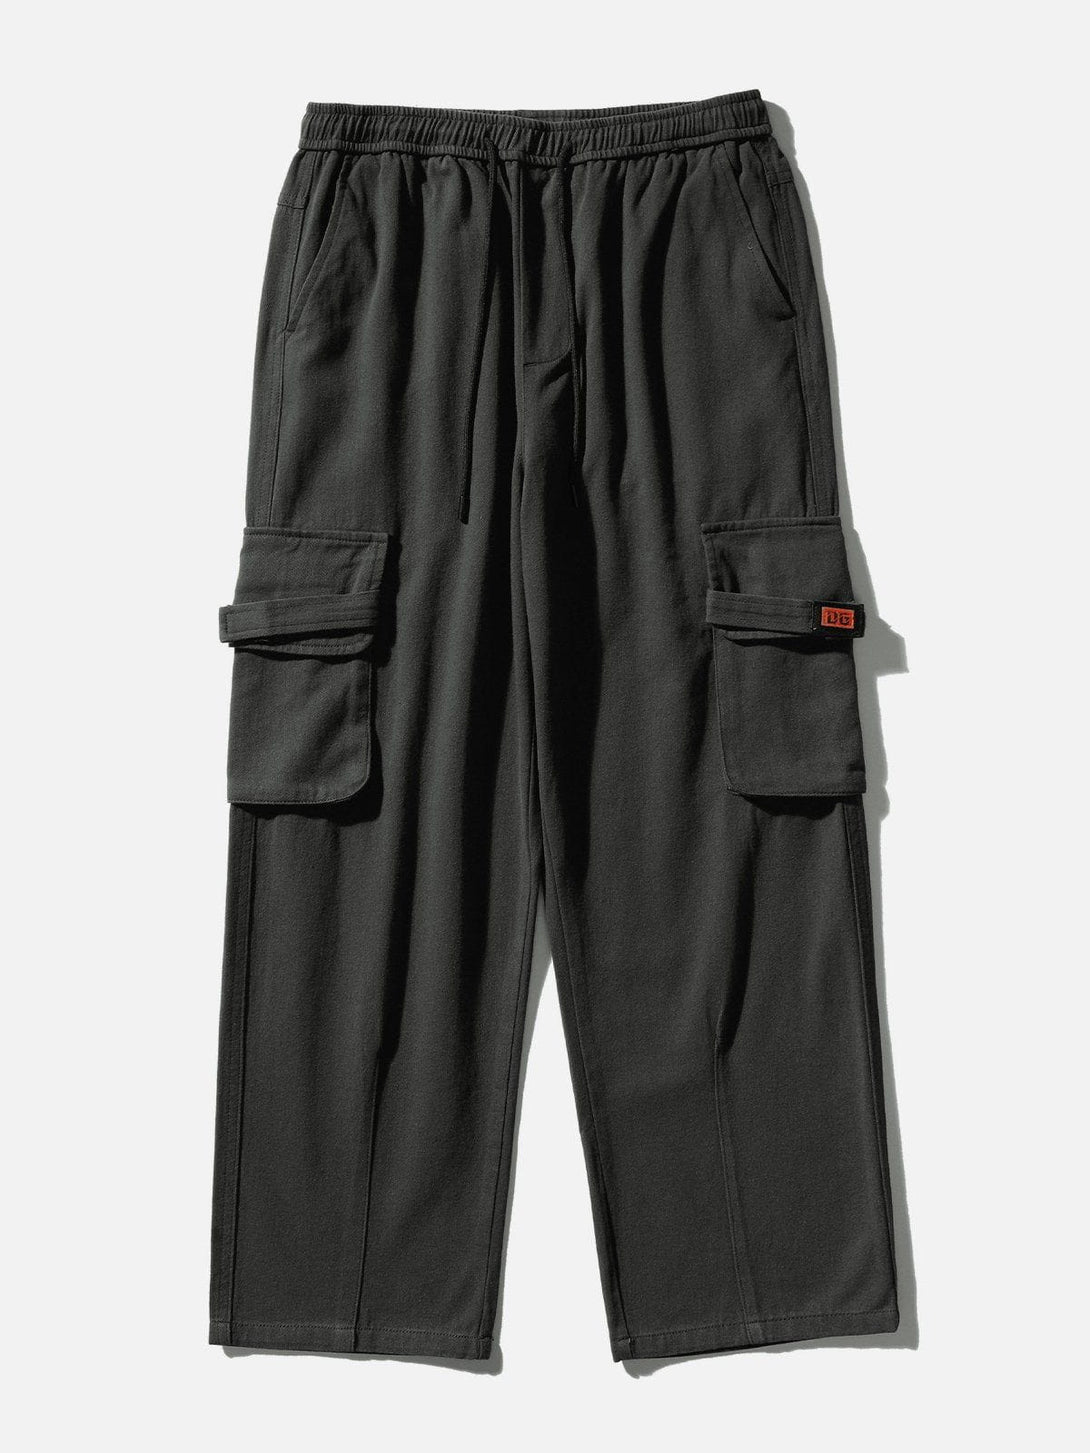 Ellesey - Embroidered Patch Multi-Pocket Cargo Pants- Streetwear Fashion - ellesey.com